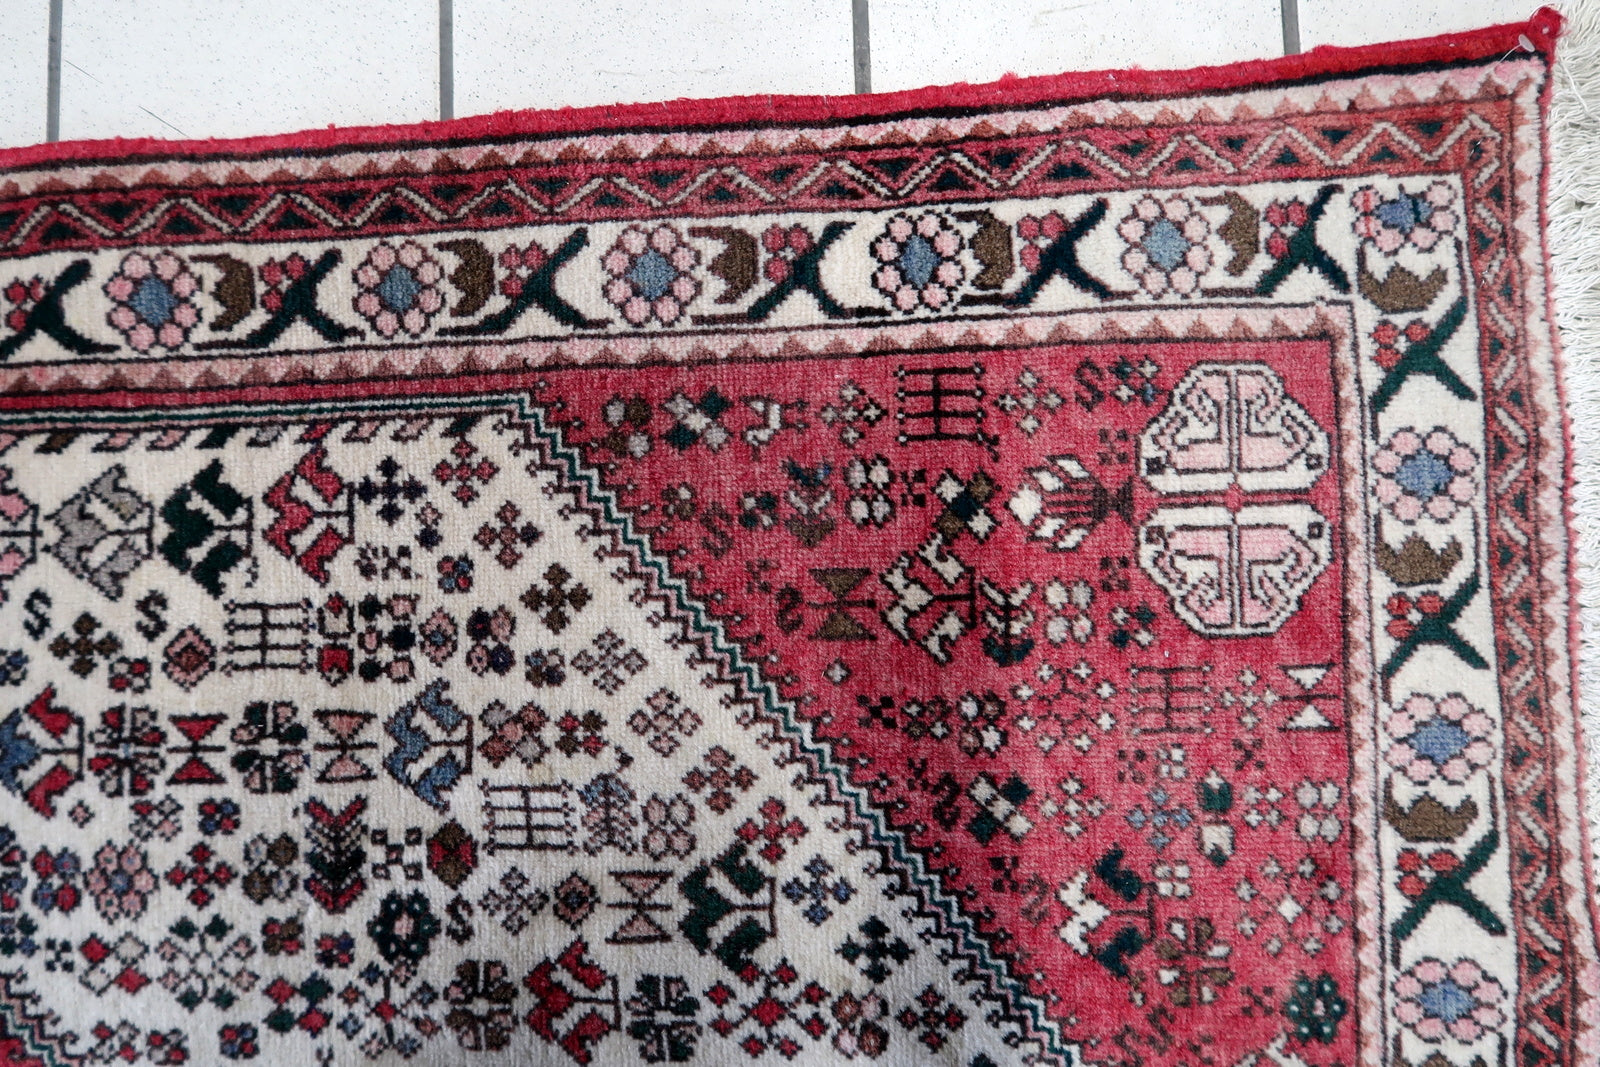 Overhead shot of the Persian Malayer rug displaying its rich color palette and intricate patterns